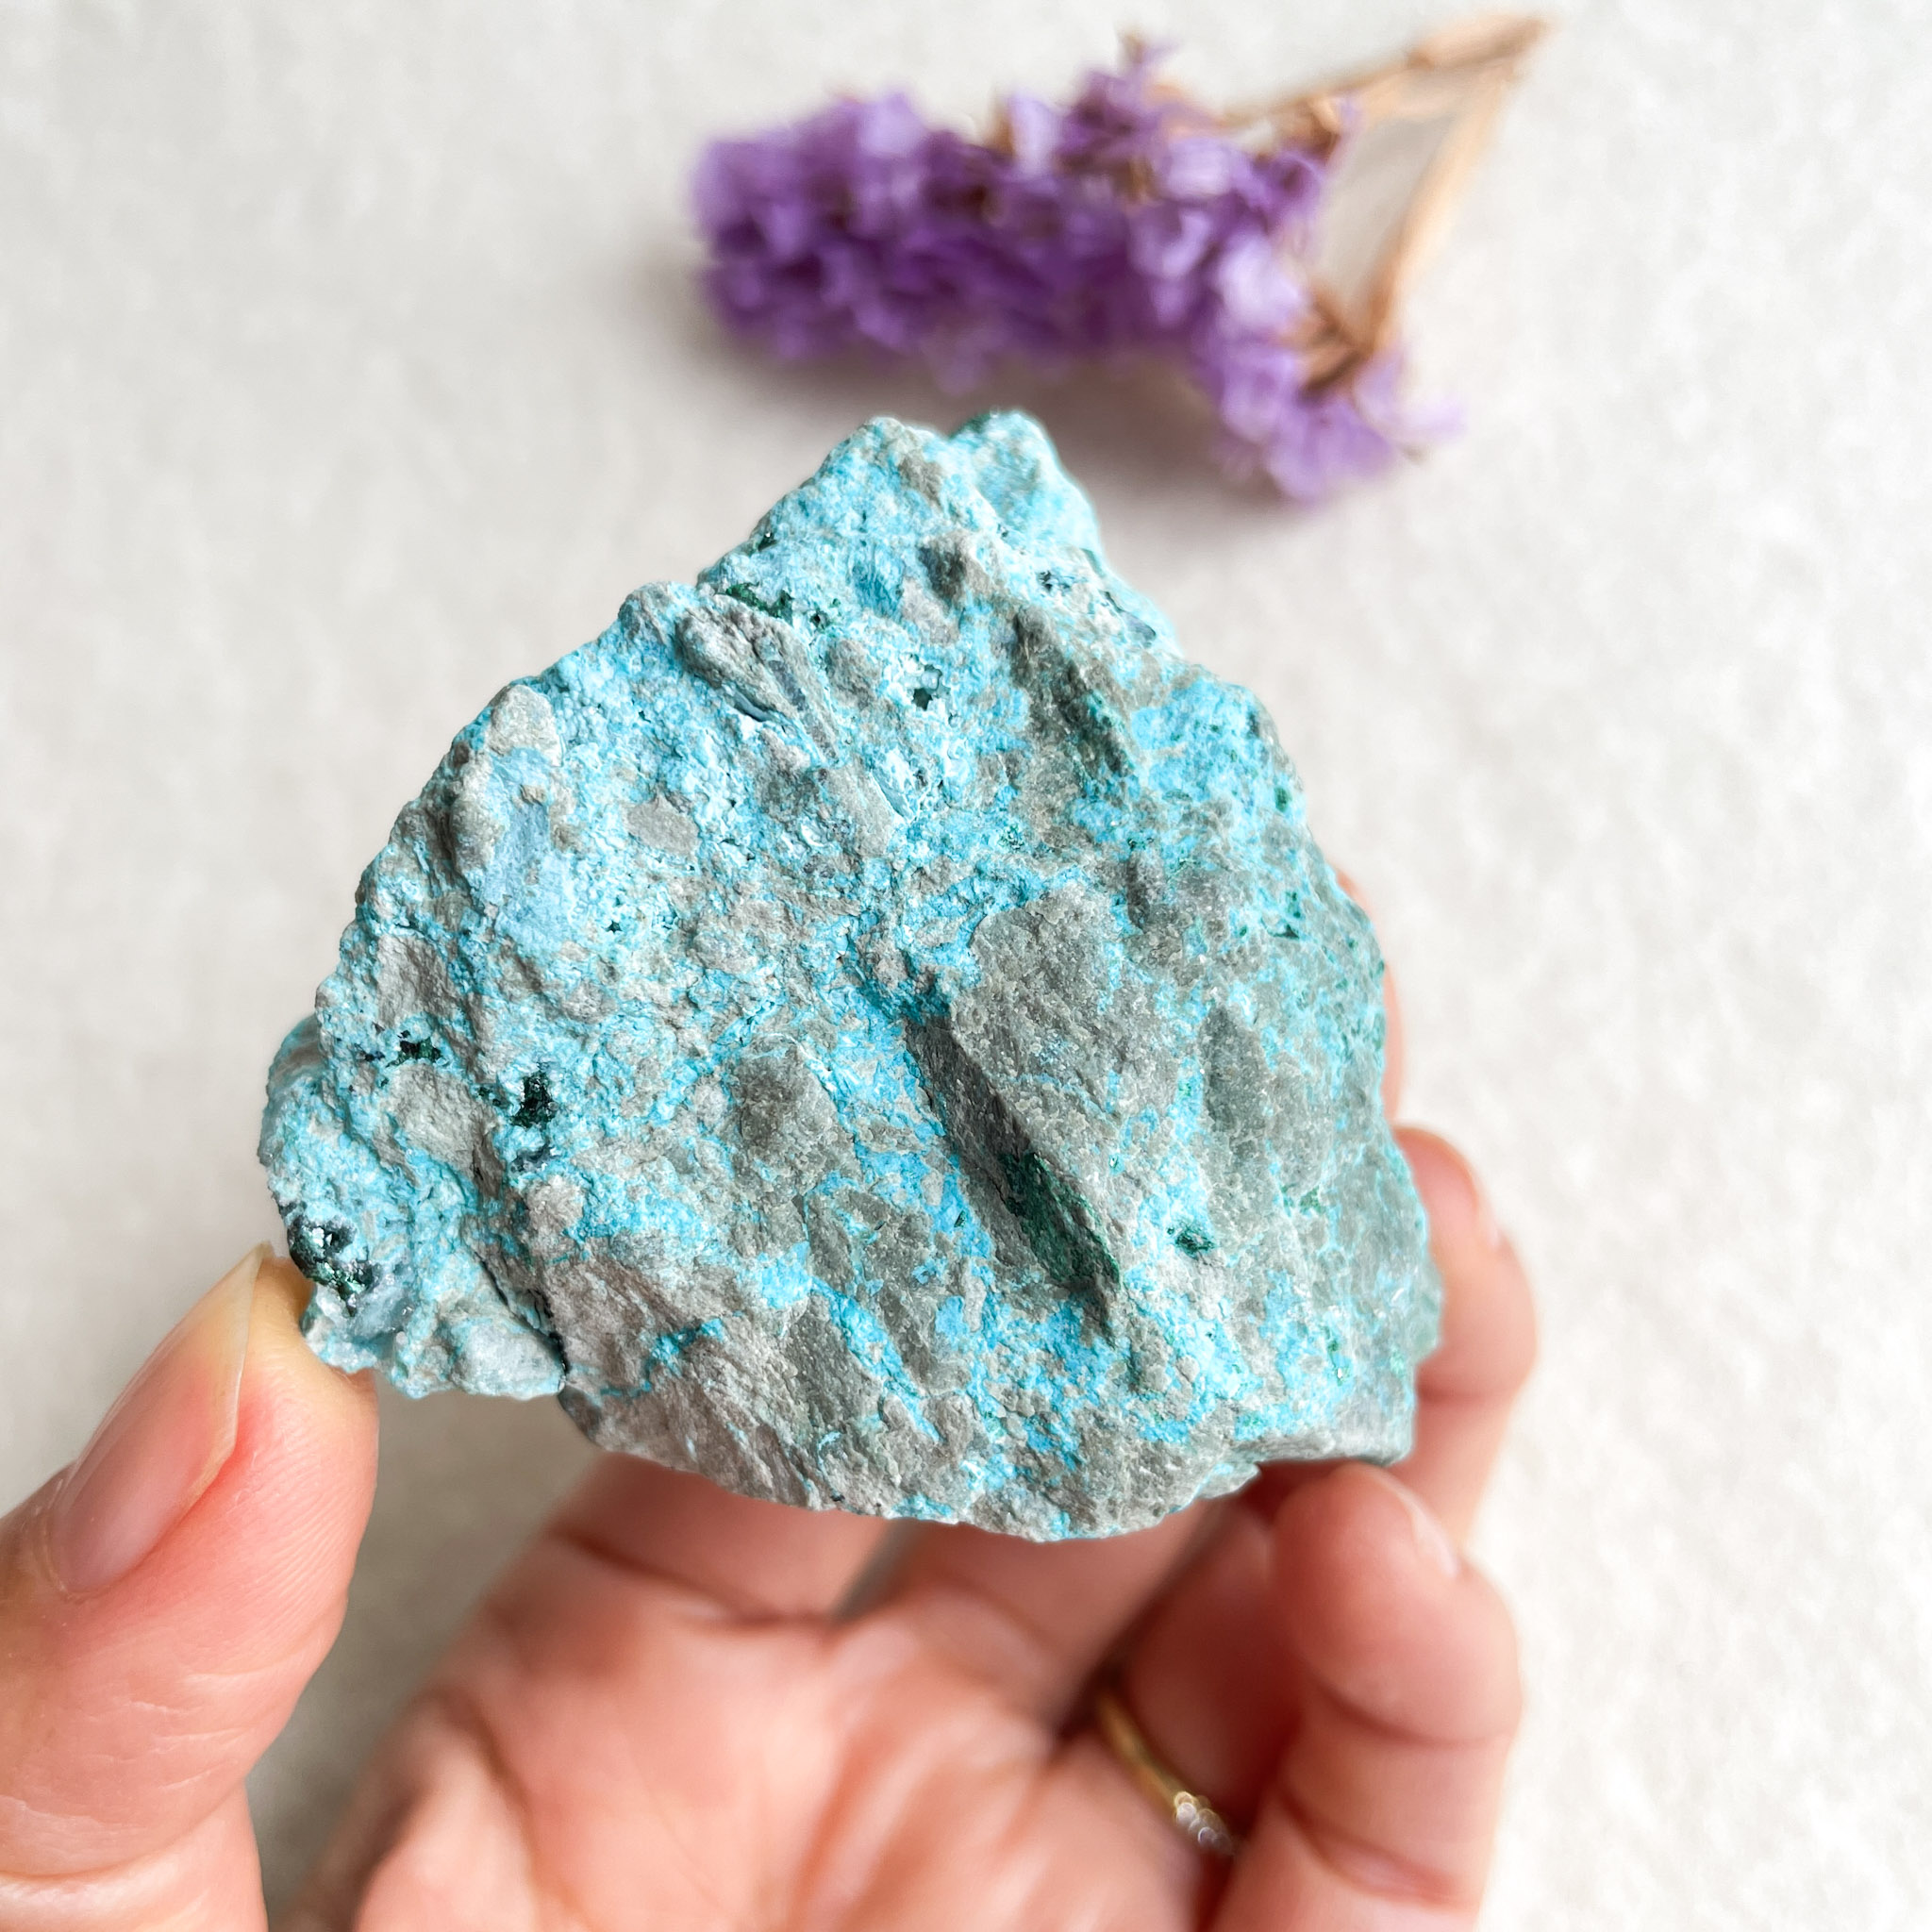 A person holding a blue mineral rock sample close to the camera, with a blurry background of white surface and a small bunch of purple flowers to the side.